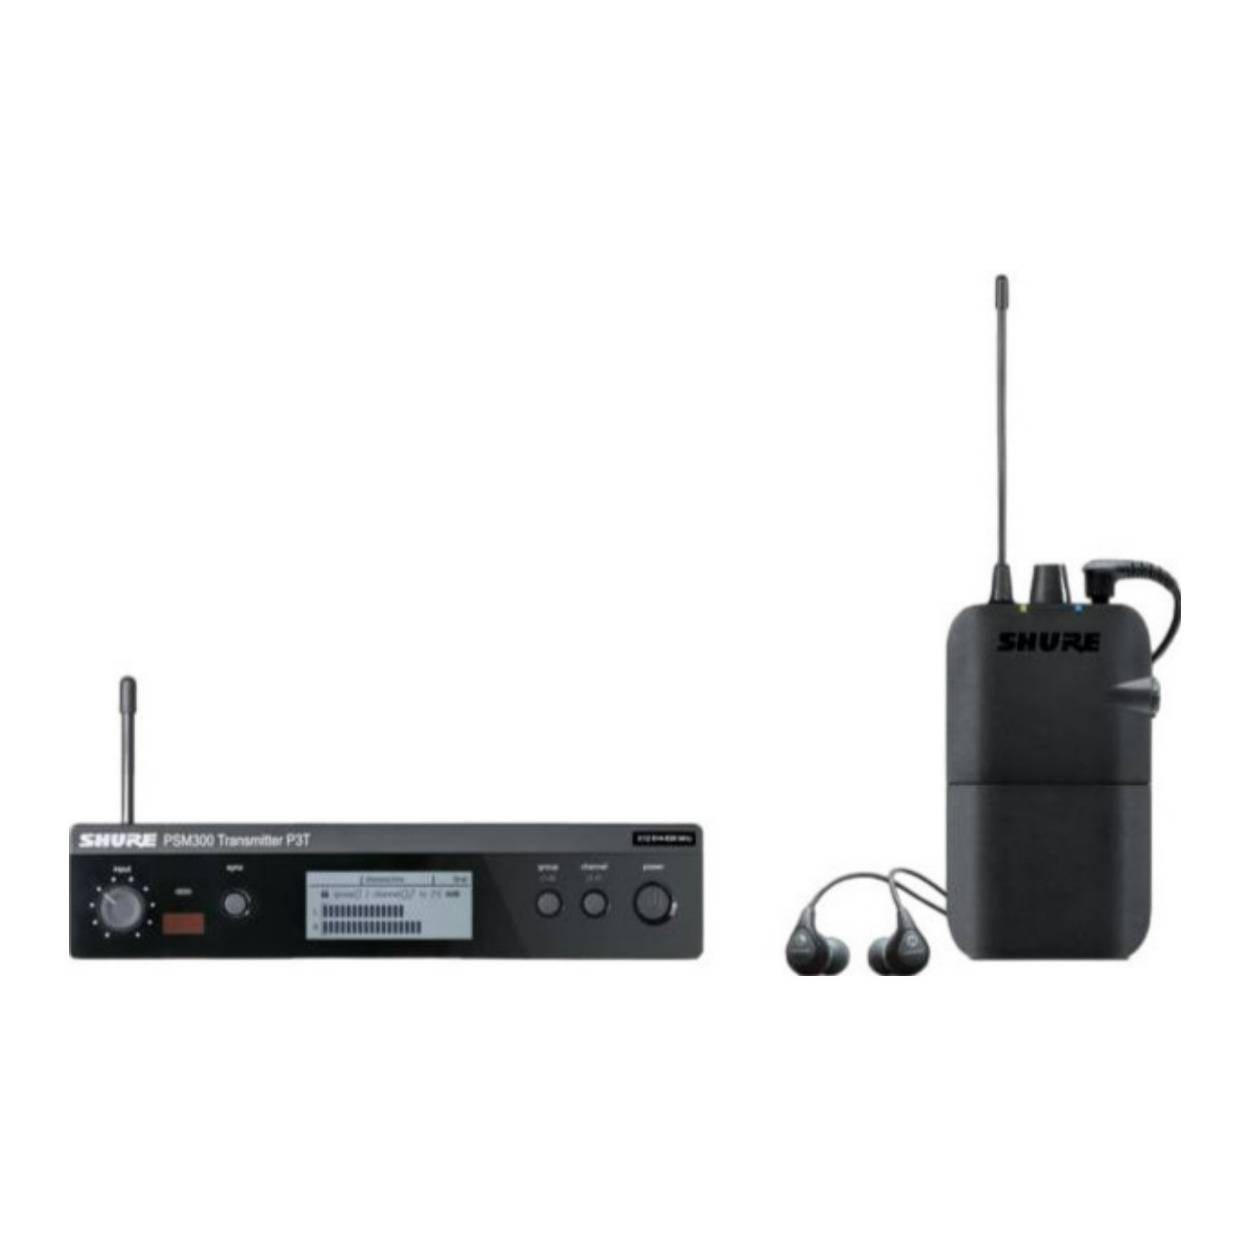 Shure P3TR112GR PSM300 Wireless In-Ear Monitoring System with SE112 Earphones and G20 Band